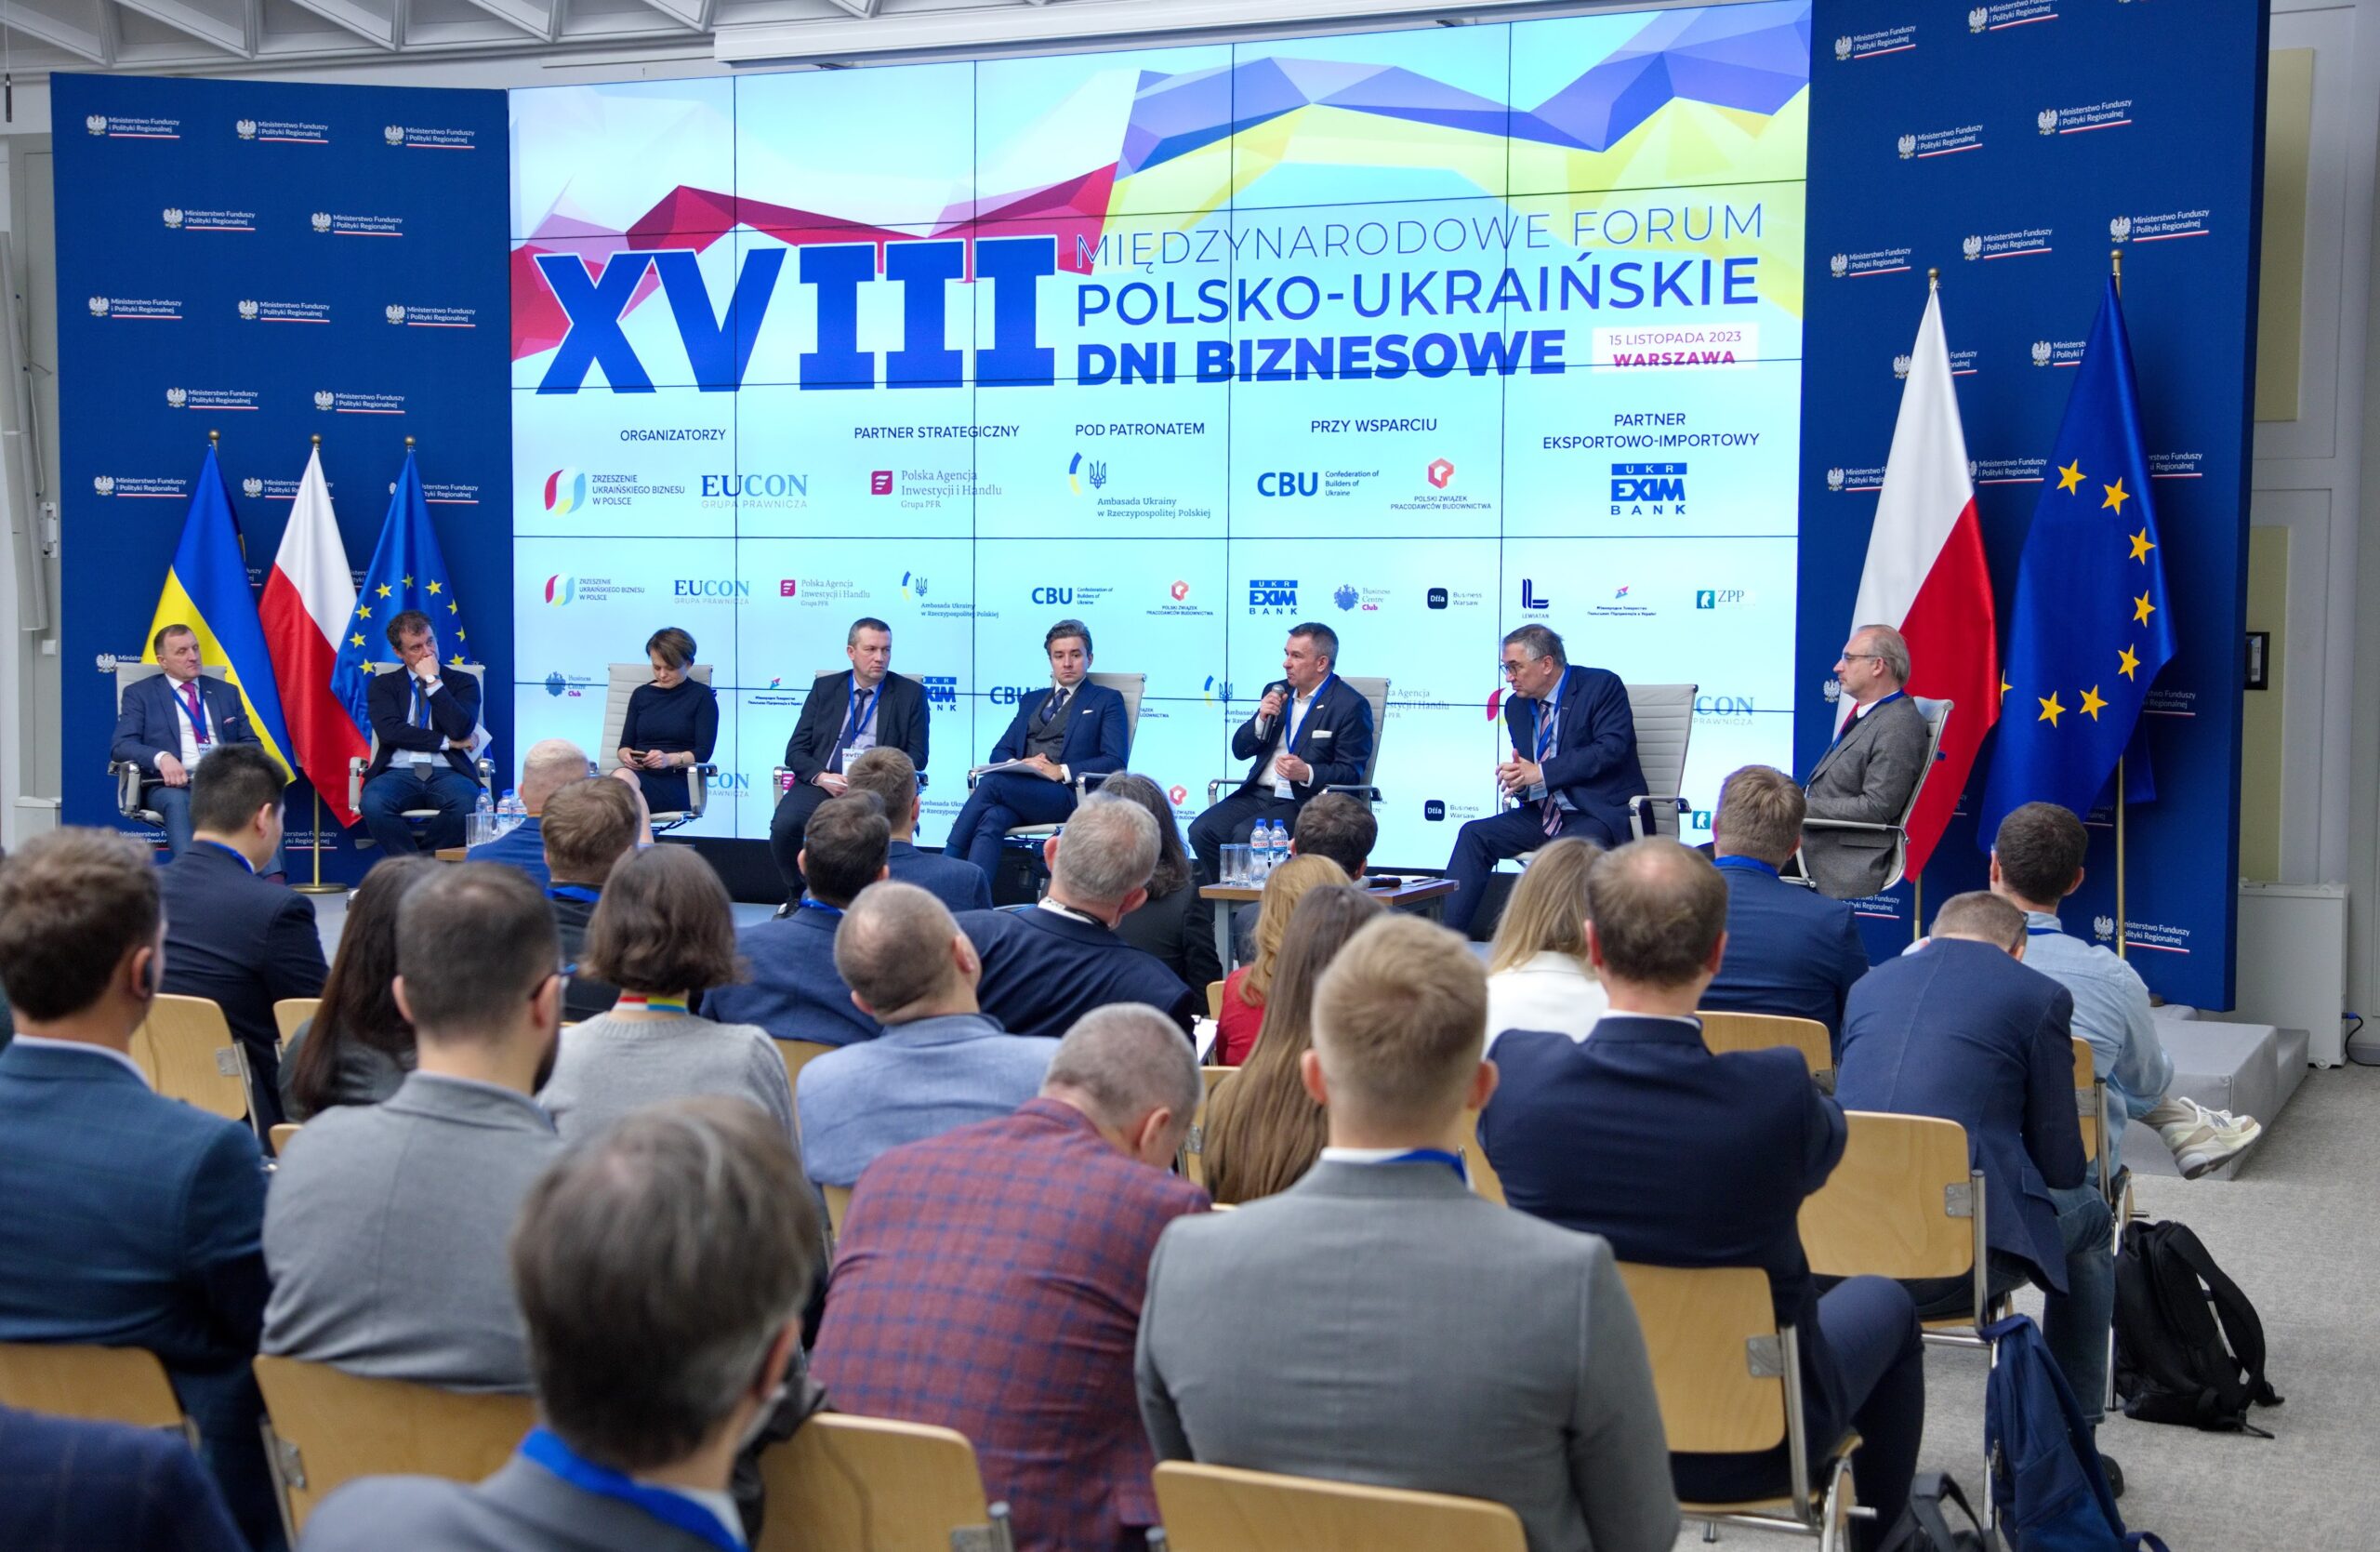 From challenges to common solutions: The XVIII International Forum „Polish-Ukrainian Business Days“ took place in Warsaw on 15 November